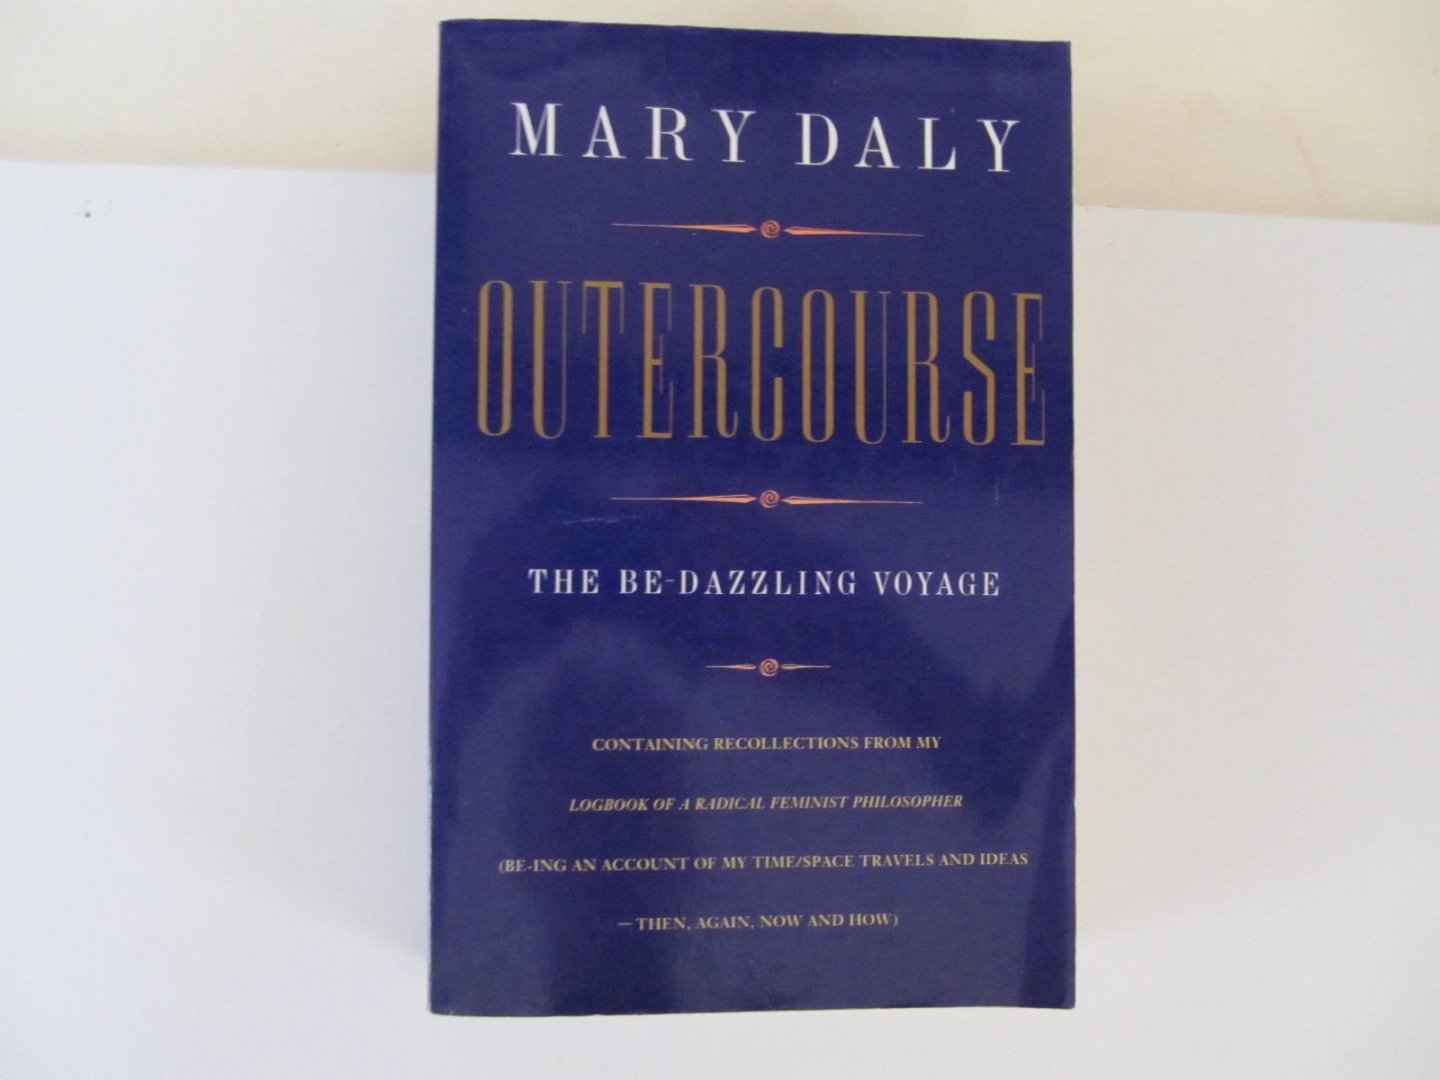 Daly, Mary - Outercourse / The Be-Dazzling Voyage